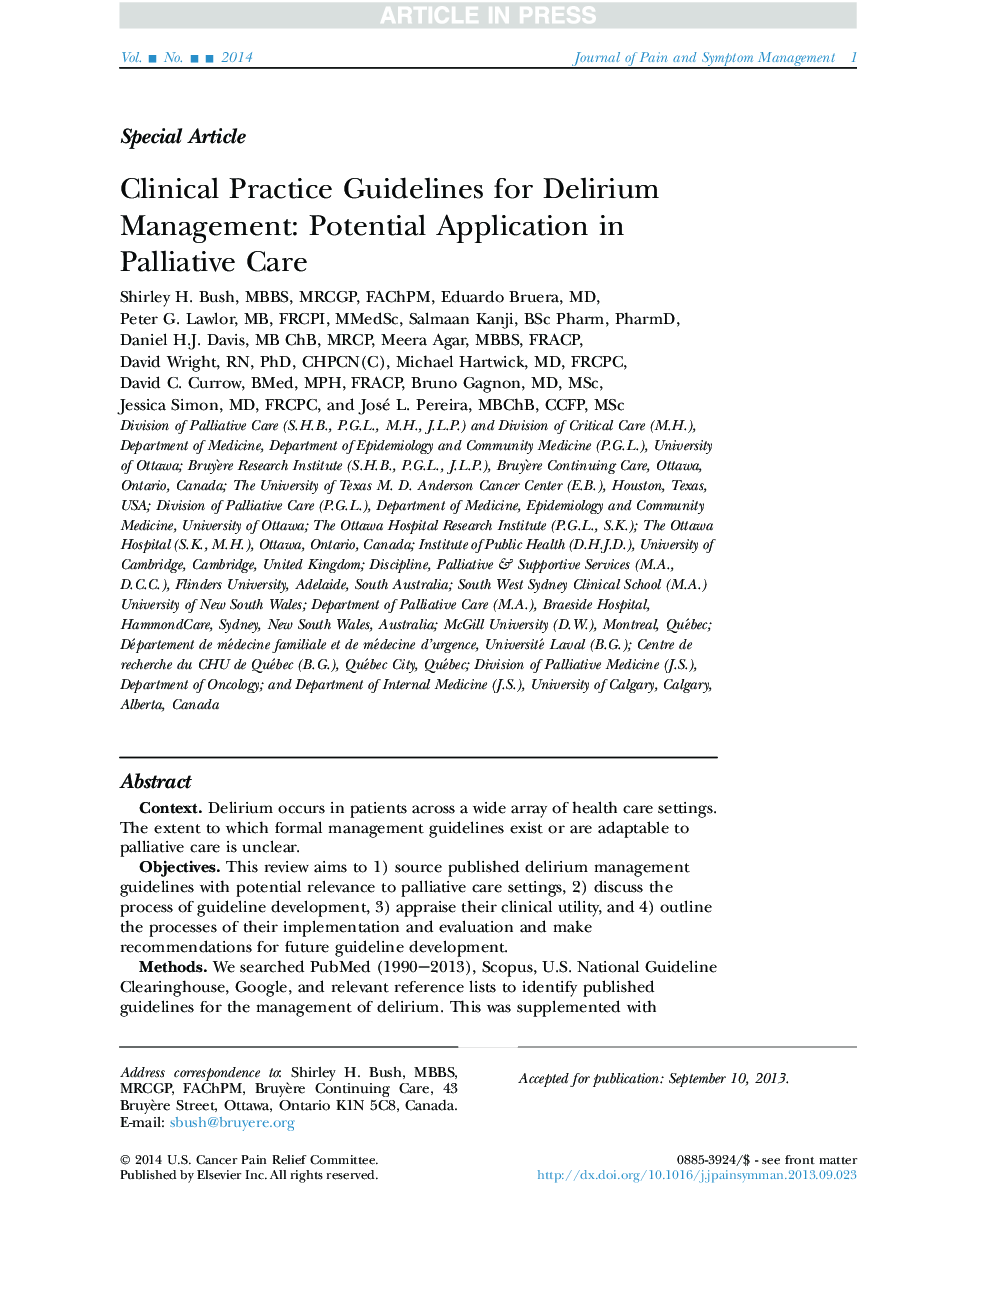 Clinical Practice Guidelines for Delirium Management: Potential Application in Palliative Care